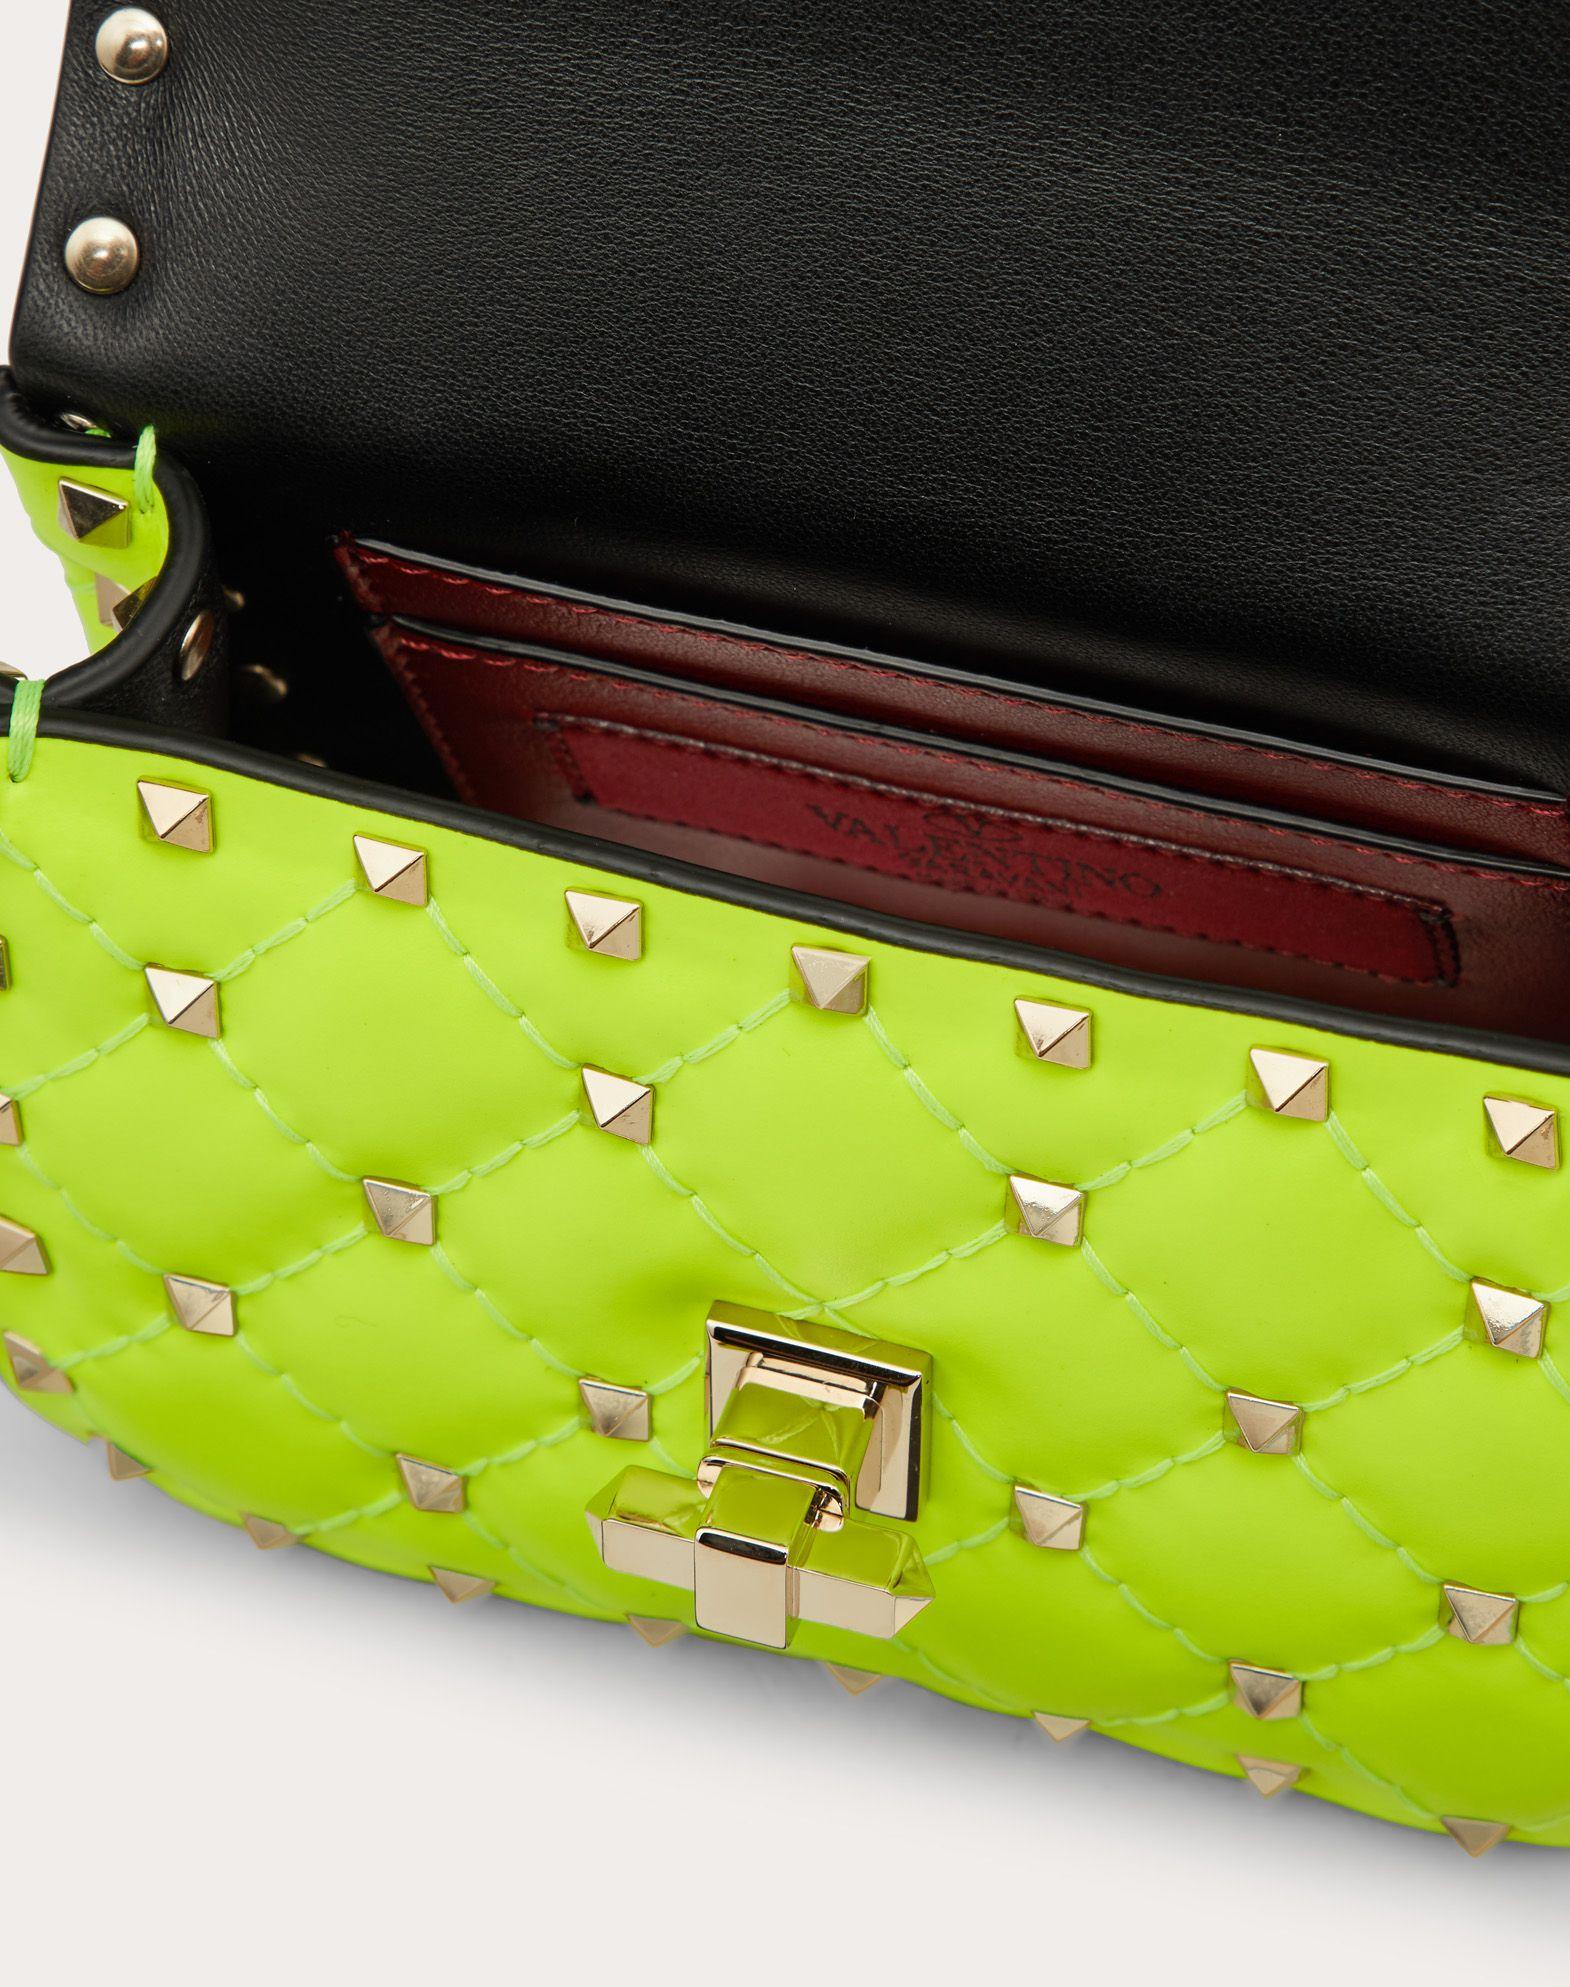 Valentino Leather Valentino Garavani Micro Rockstud Spike Fluo Calfskin Bag  Ss20 Runway Preview in Lime (Green) - Lyst